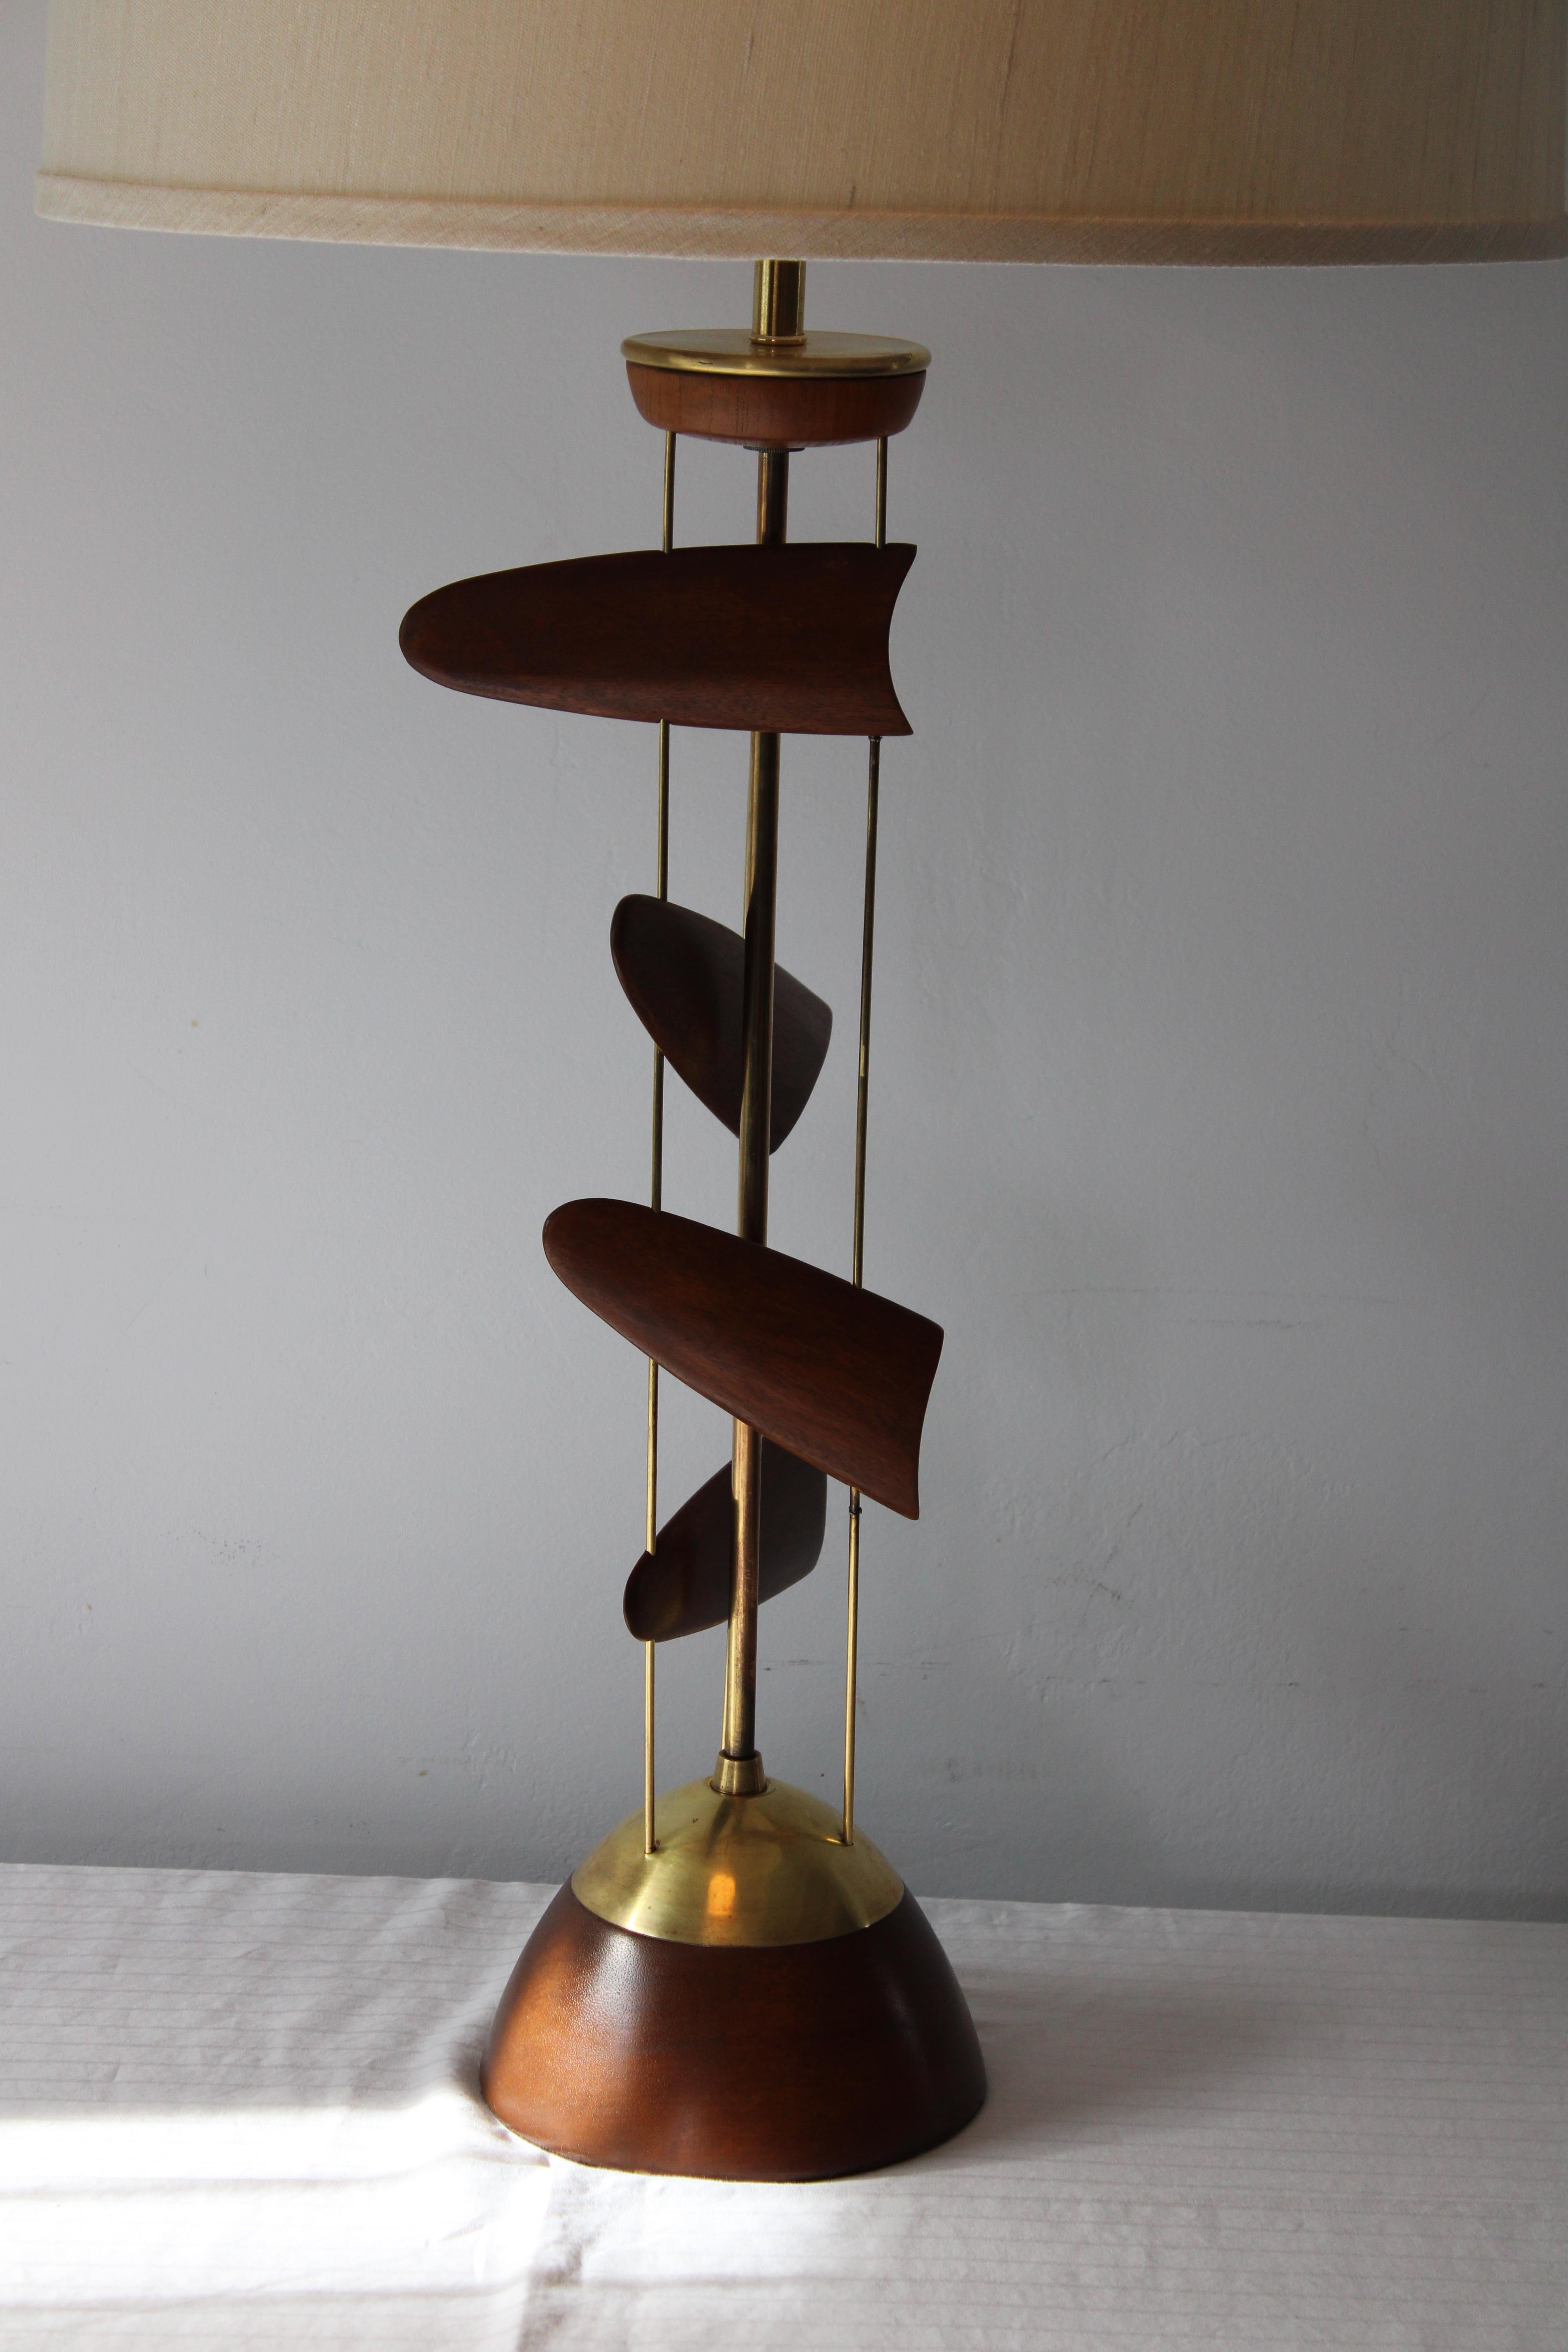 Sculptural lamp attributed to Leo Amino. Total height from base to the bottom of socket is 25